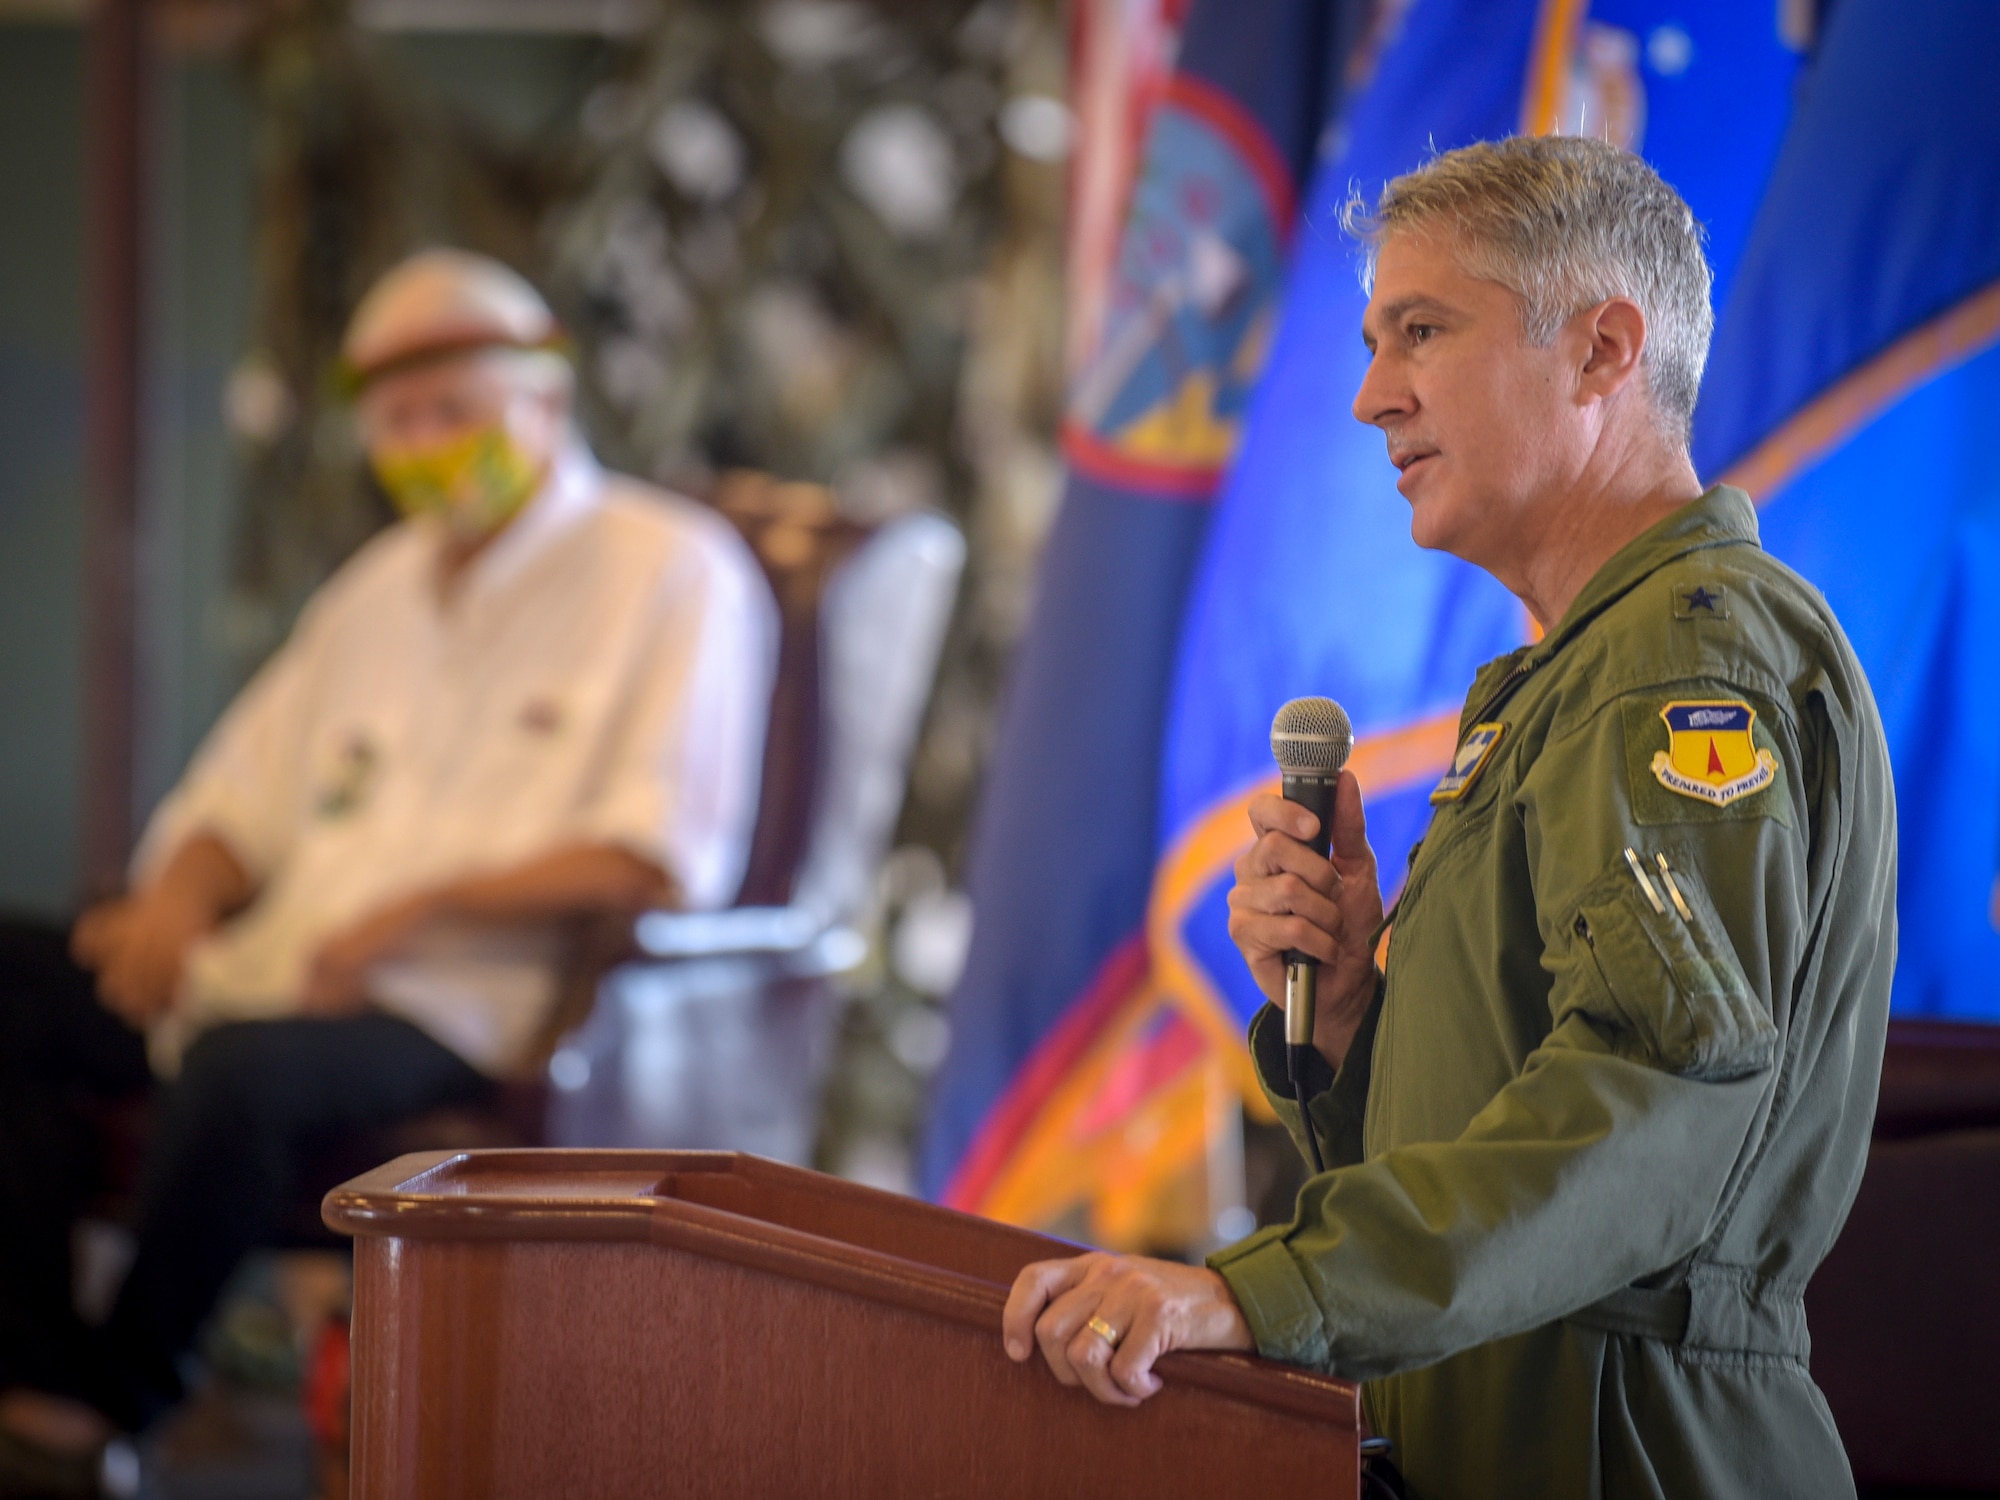 Brig. Gen. Jeremy Sloane, 36th Wing commander, speaks at the Operation Christmas Drop “Push” Ceremony at Andersen Air Force Base, Guam, Dec. 7, 2020.